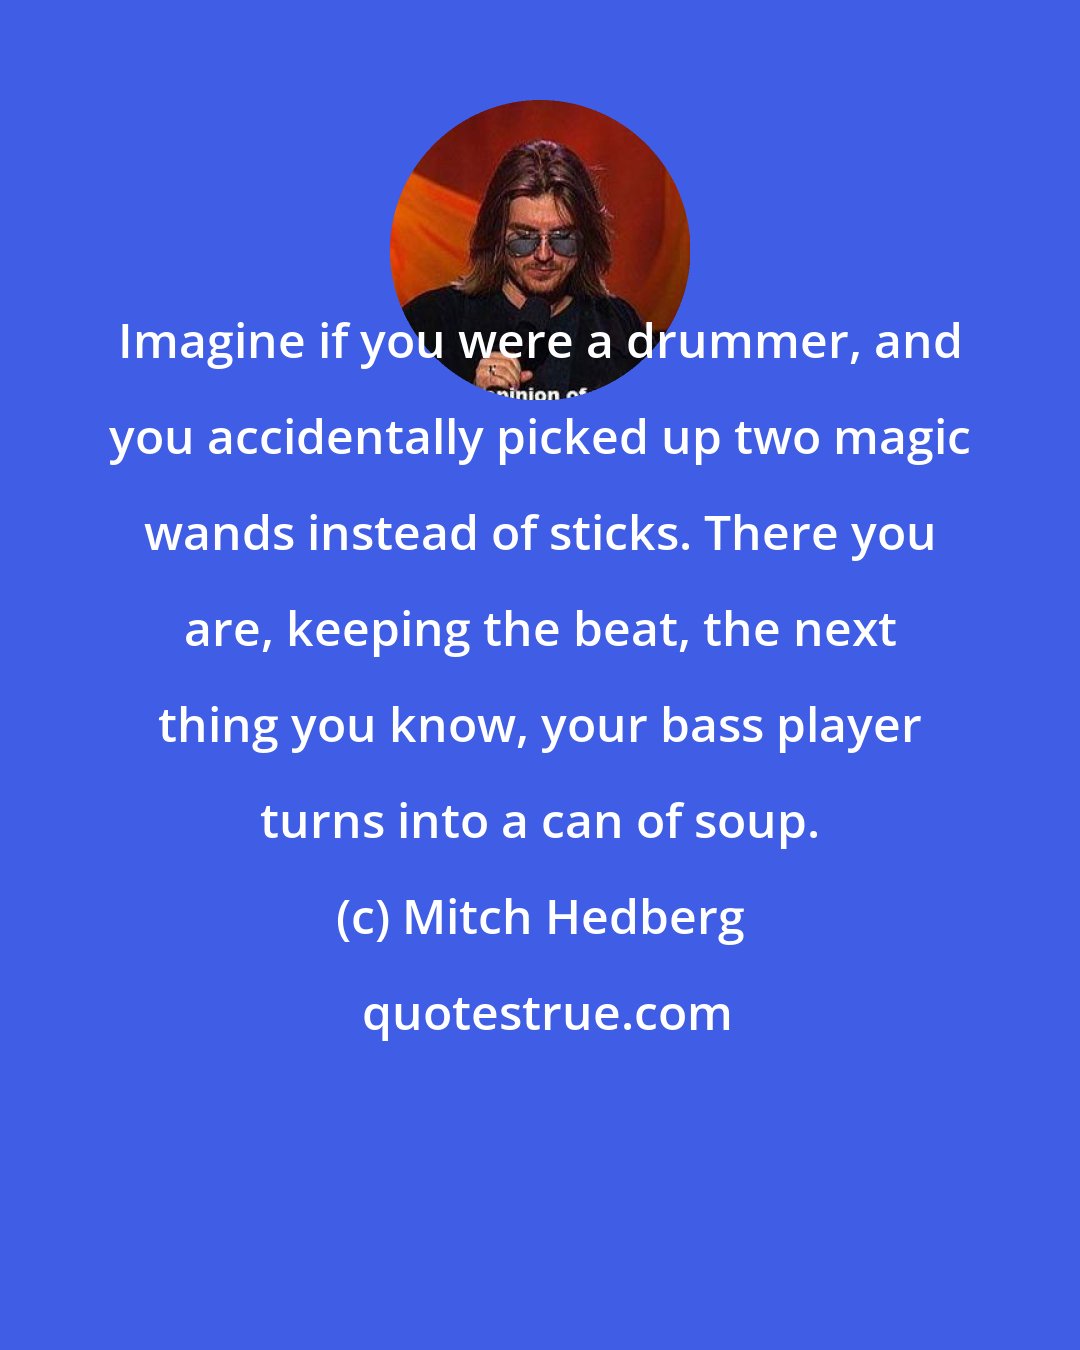 Mitch Hedberg: Imagine if you were a drummer, and you accidentally picked up two magic wands instead of sticks. There you are, keeping the beat, the next thing you know, your bass player turns into a can of soup.